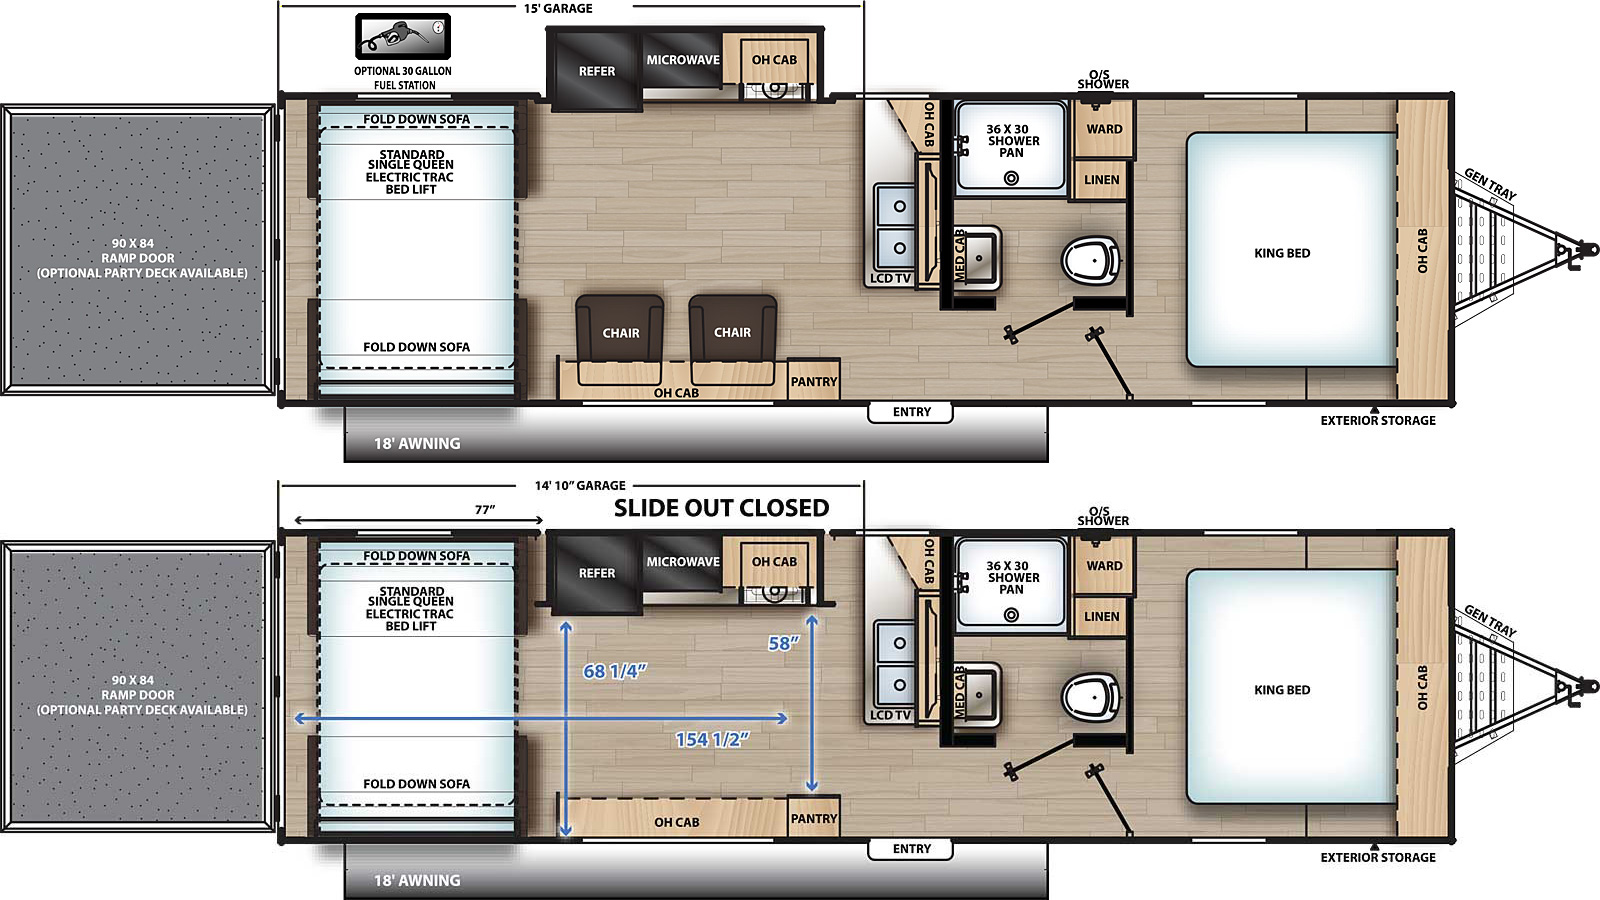 The 28THS has one slide out on the off-door side and one entry door on the door side. Interior layout from front to back: foot facing king bed with overhead cabinet; off-door side bathroom; kitchen living dining area with off-door side slide out containing cook top stove, overhead cabinet, microwave cabinet, and refrigerator; off-door side double basin sink with overhead cabinet and television; door side chairs with overhead cabinet and pantry; and rear fold-down sofas and single queen electric trac bed lift.